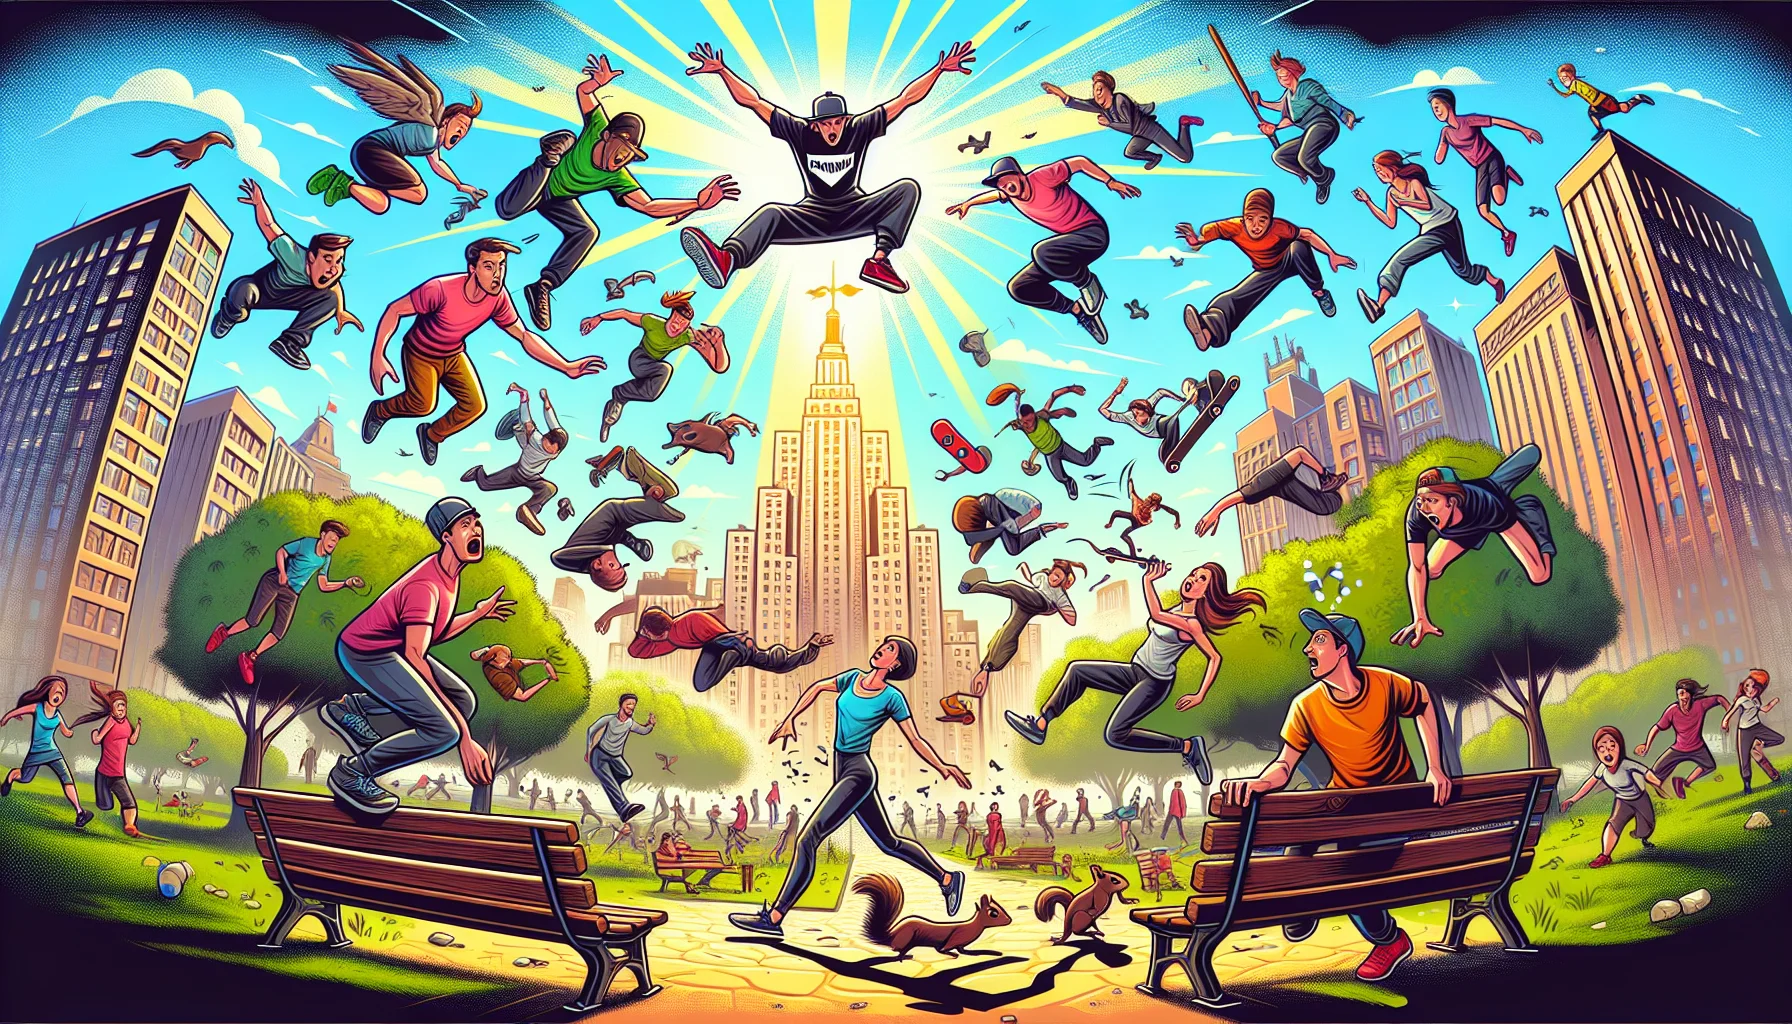 Create a humorous, enticing image illustrating a parkour logo. Imagine a cartoon-like scene of a city park with diverse men and women practicing parkour. They're jumping over benches, climbing on trees, and running along pathways. The scene bursts with energetic colors and laugh-inducing situations - someone getting their foot stuck in a bush, another person stumbling over with surprise as a squirrel darts between their feet, and a couple of onlookers peering in awe at these athletes and their astonishing agility. The parkour logo shines brightly in the sky like a superhero bat-signal inspiring all to jump into action.